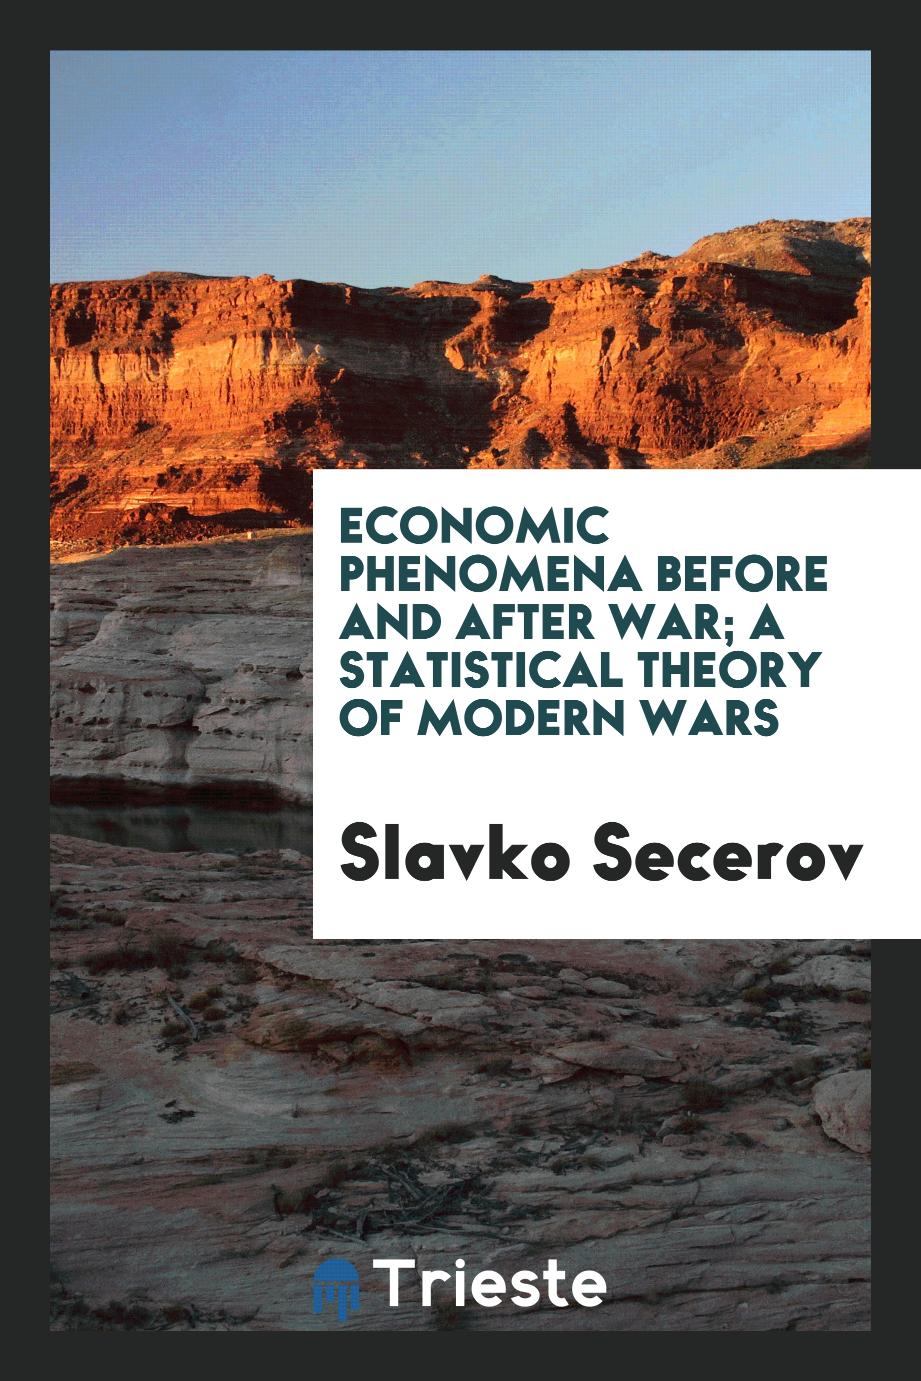 Economic phenomena before and after war; a statistical theory of modern wars